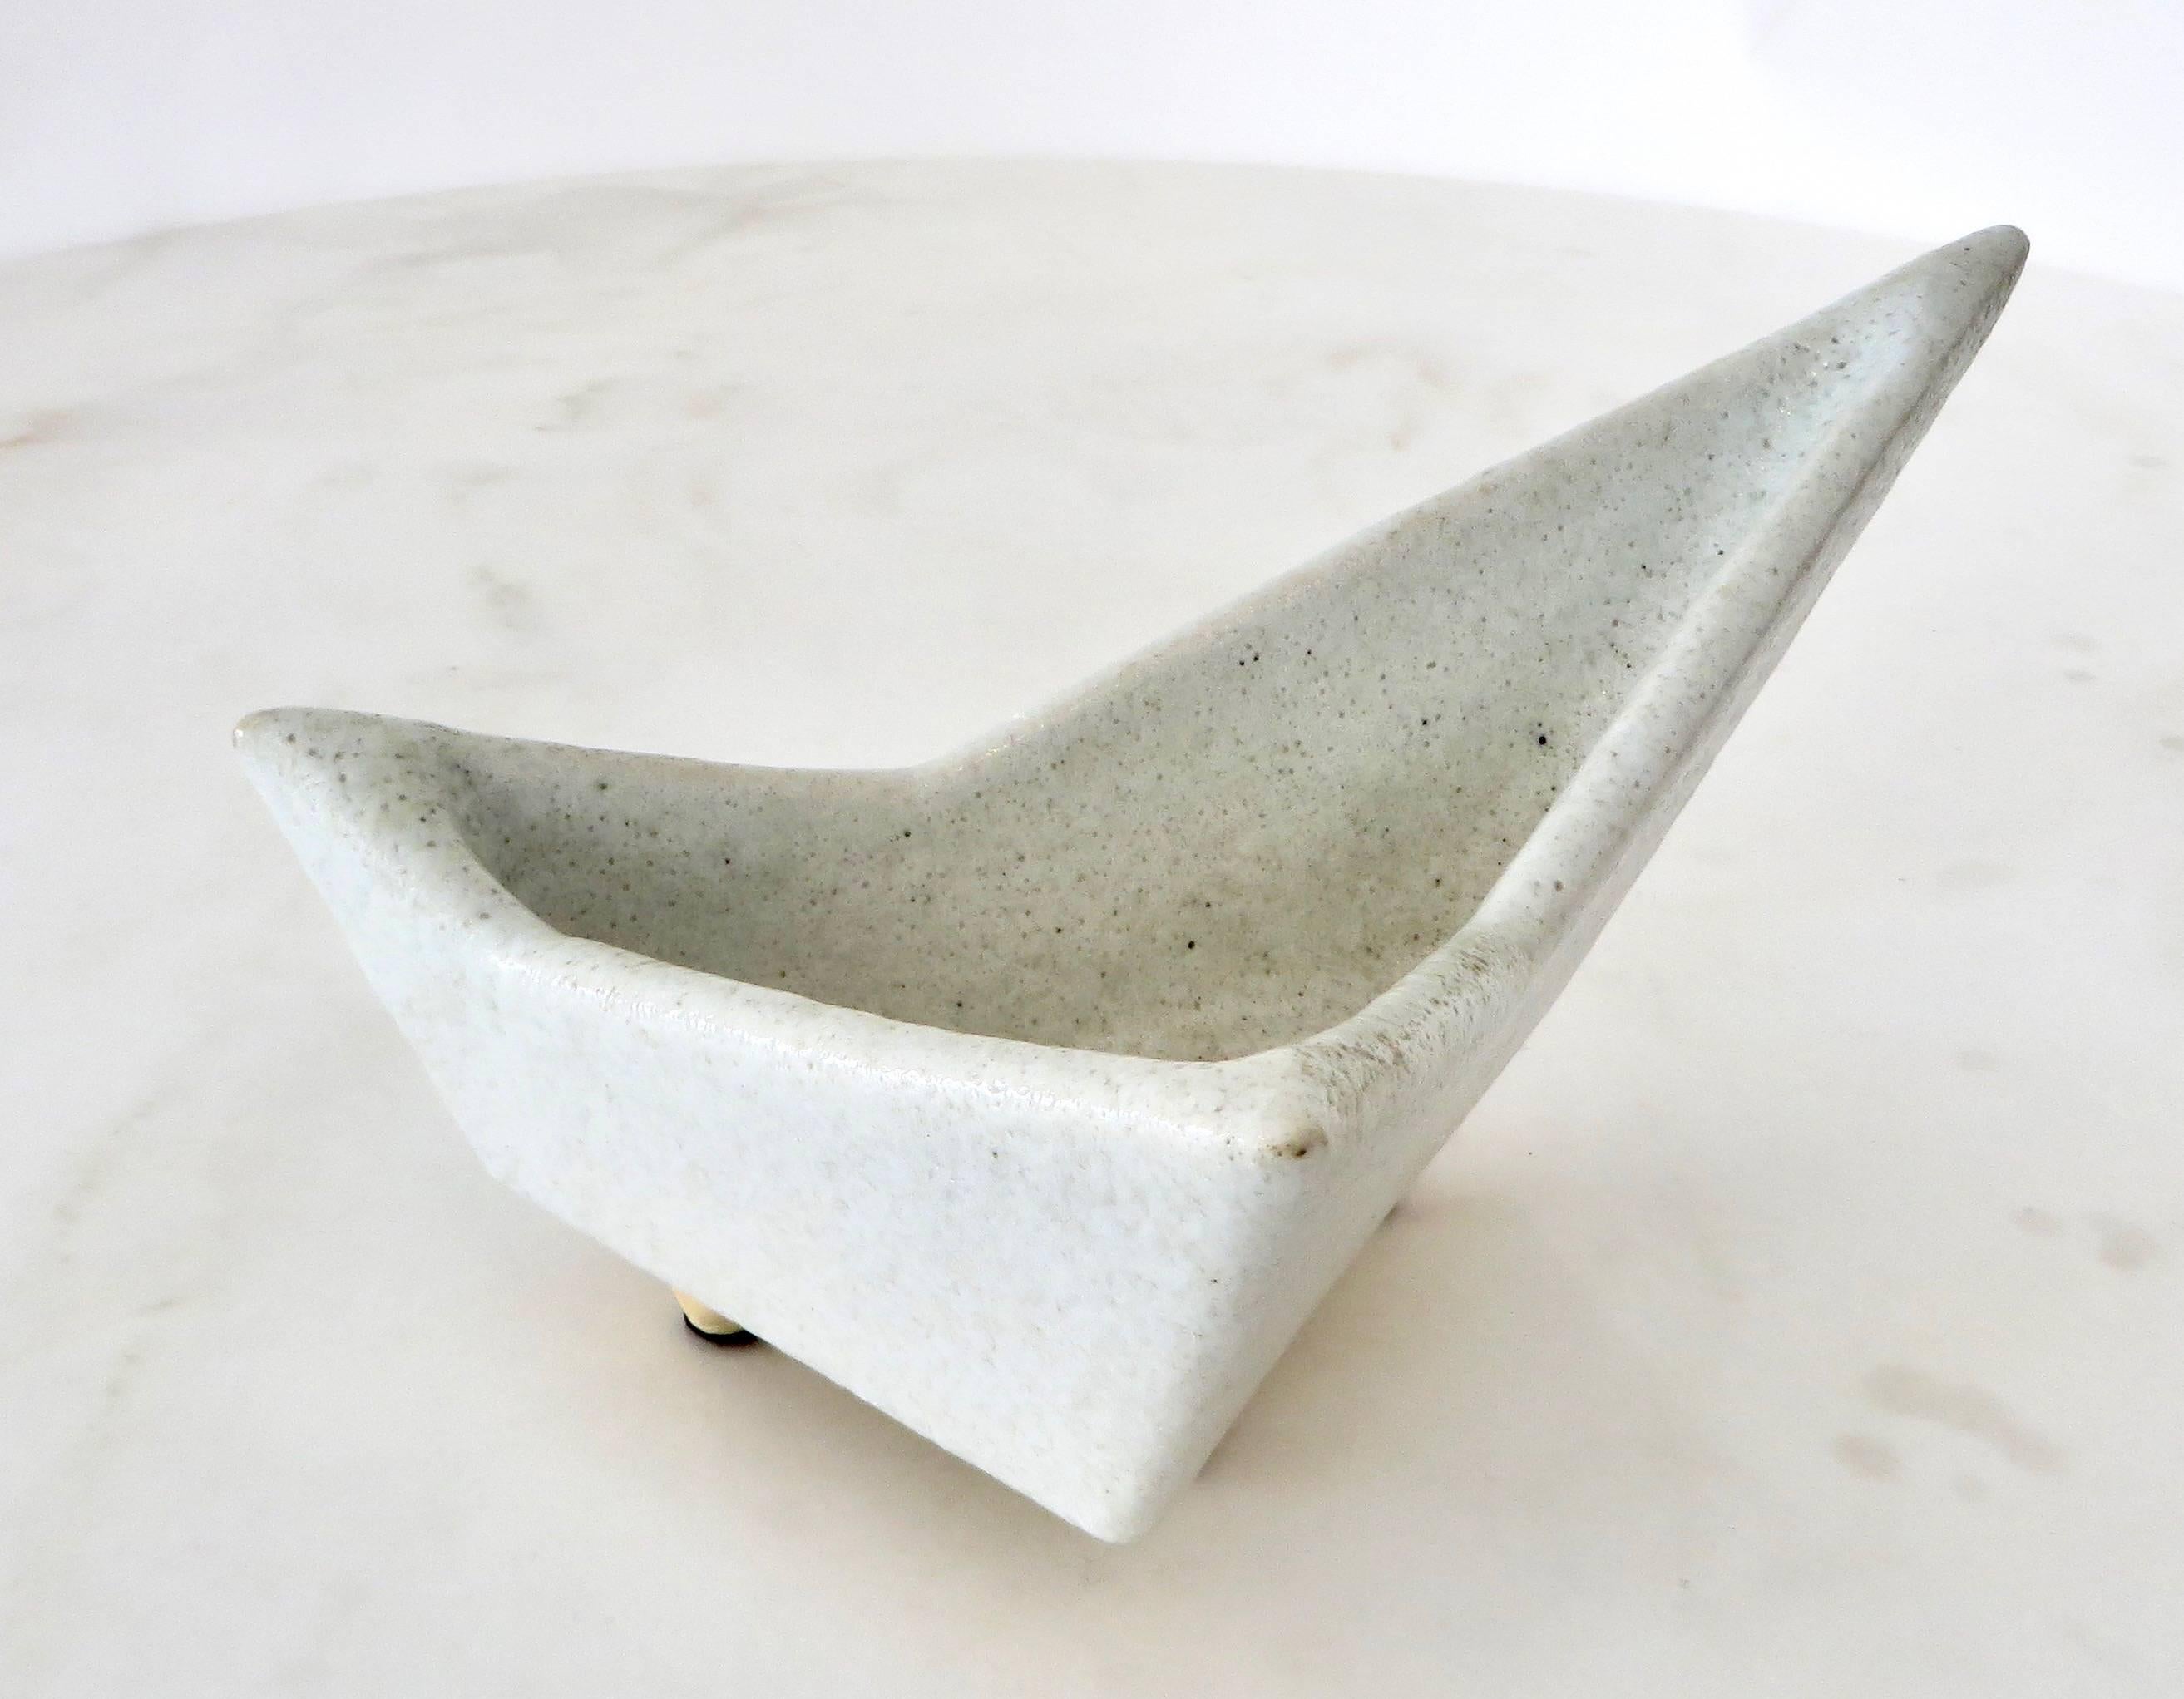 Mid-20th Century Japanese Ikebana Vase with an Abstract Highly Textured White Glazed Ceramic